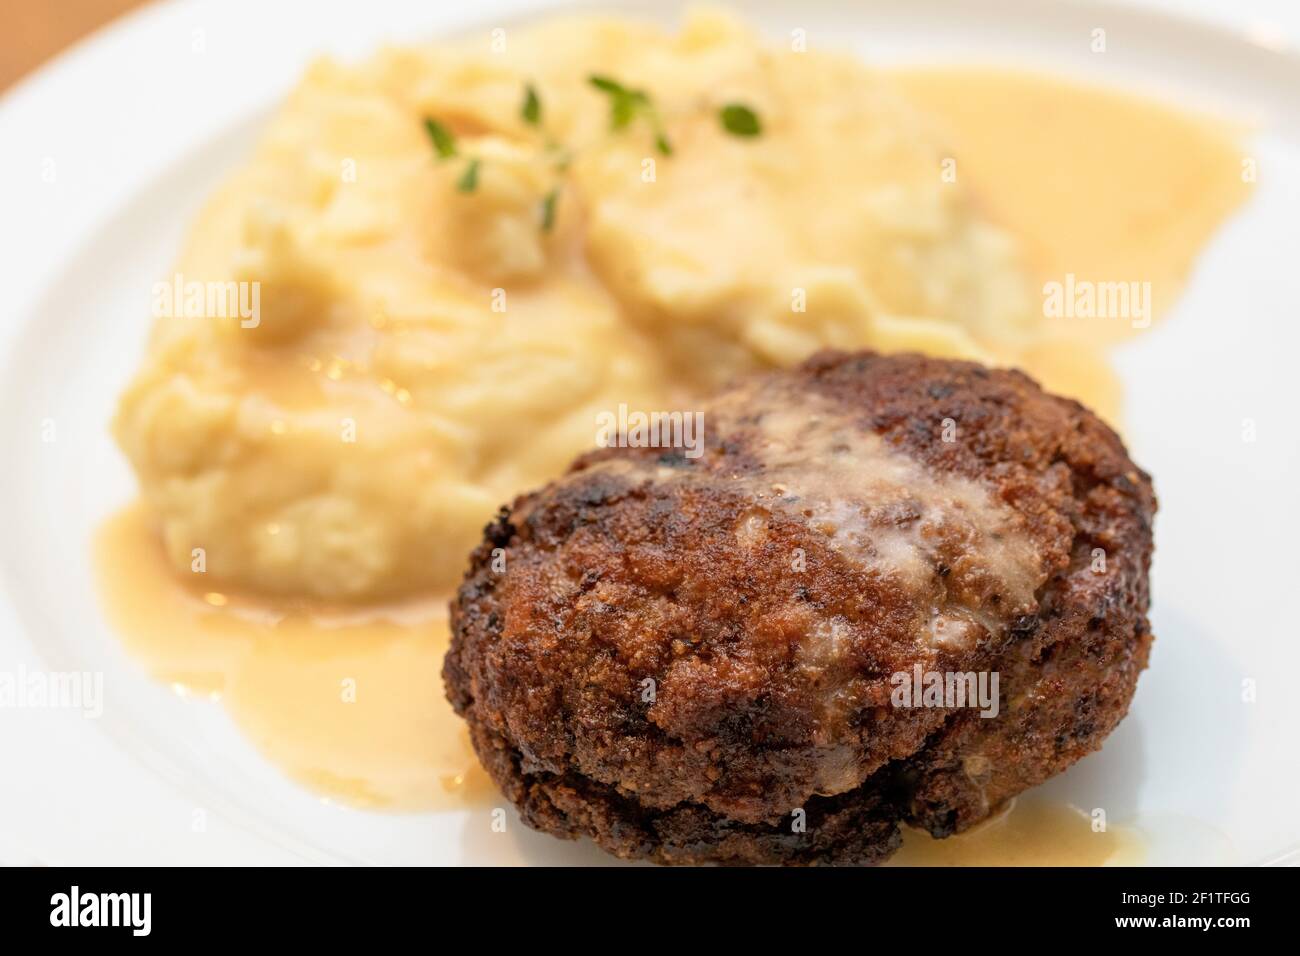 meatball with mashed potatoes and sauce Stock Photo